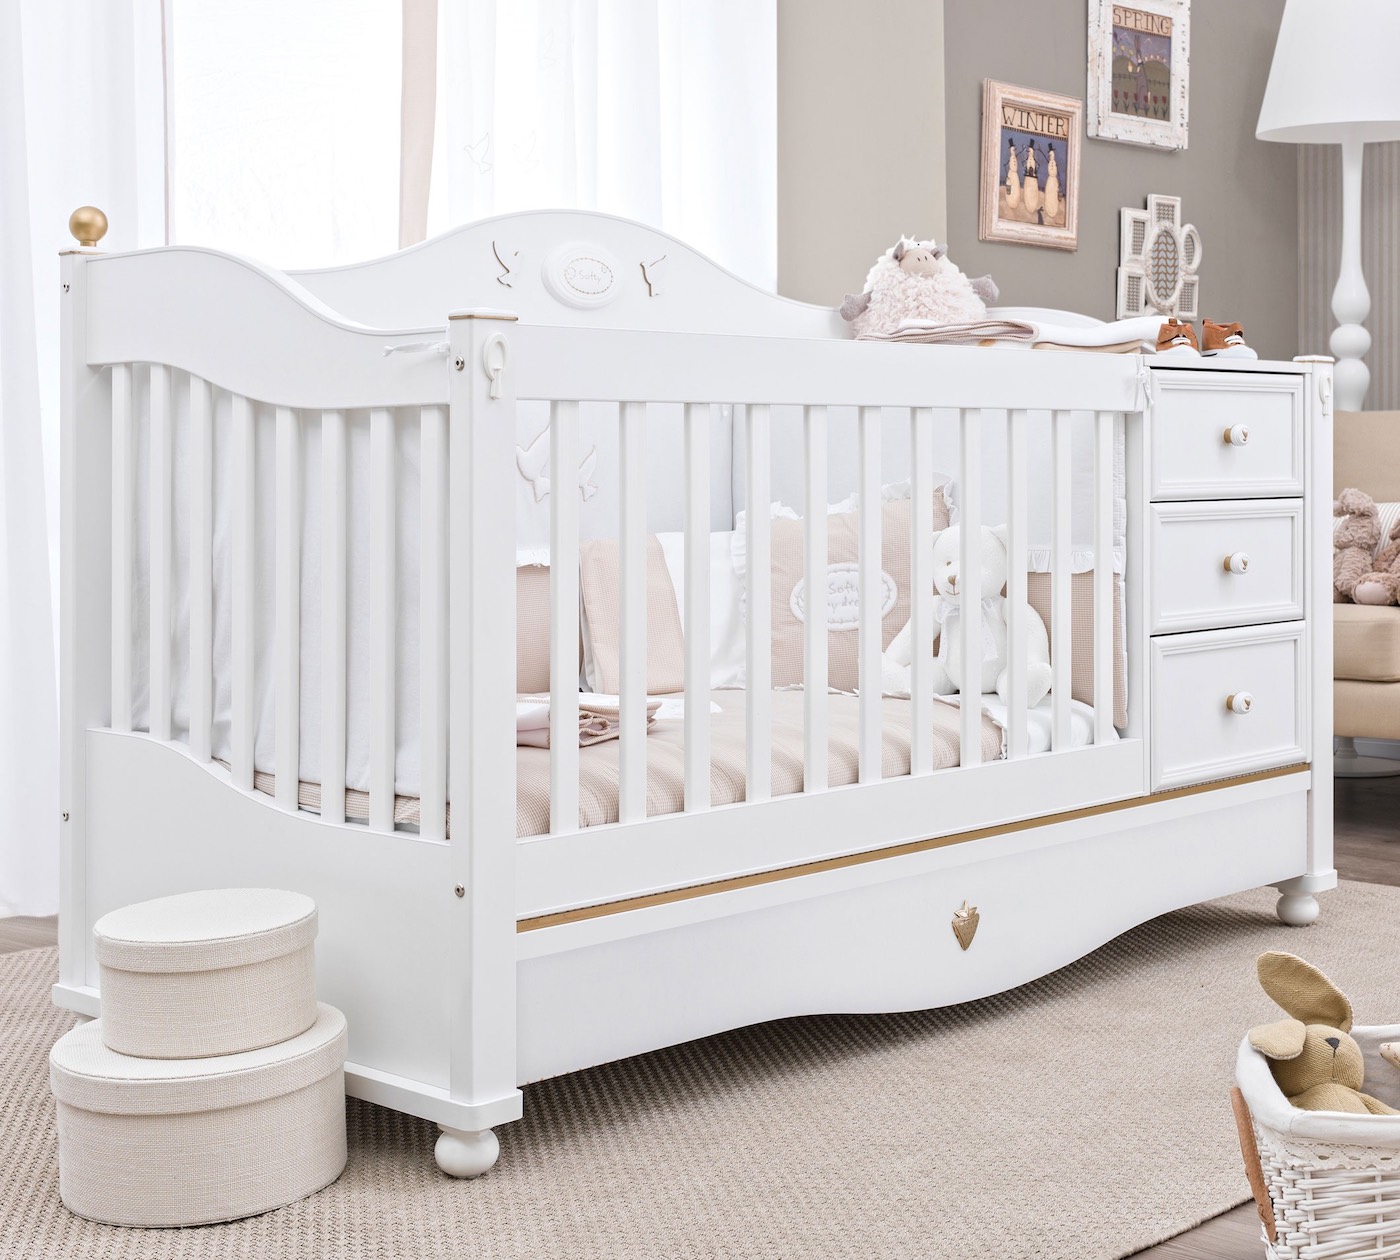 Different Types Of Baby Cribs: How To Choose?